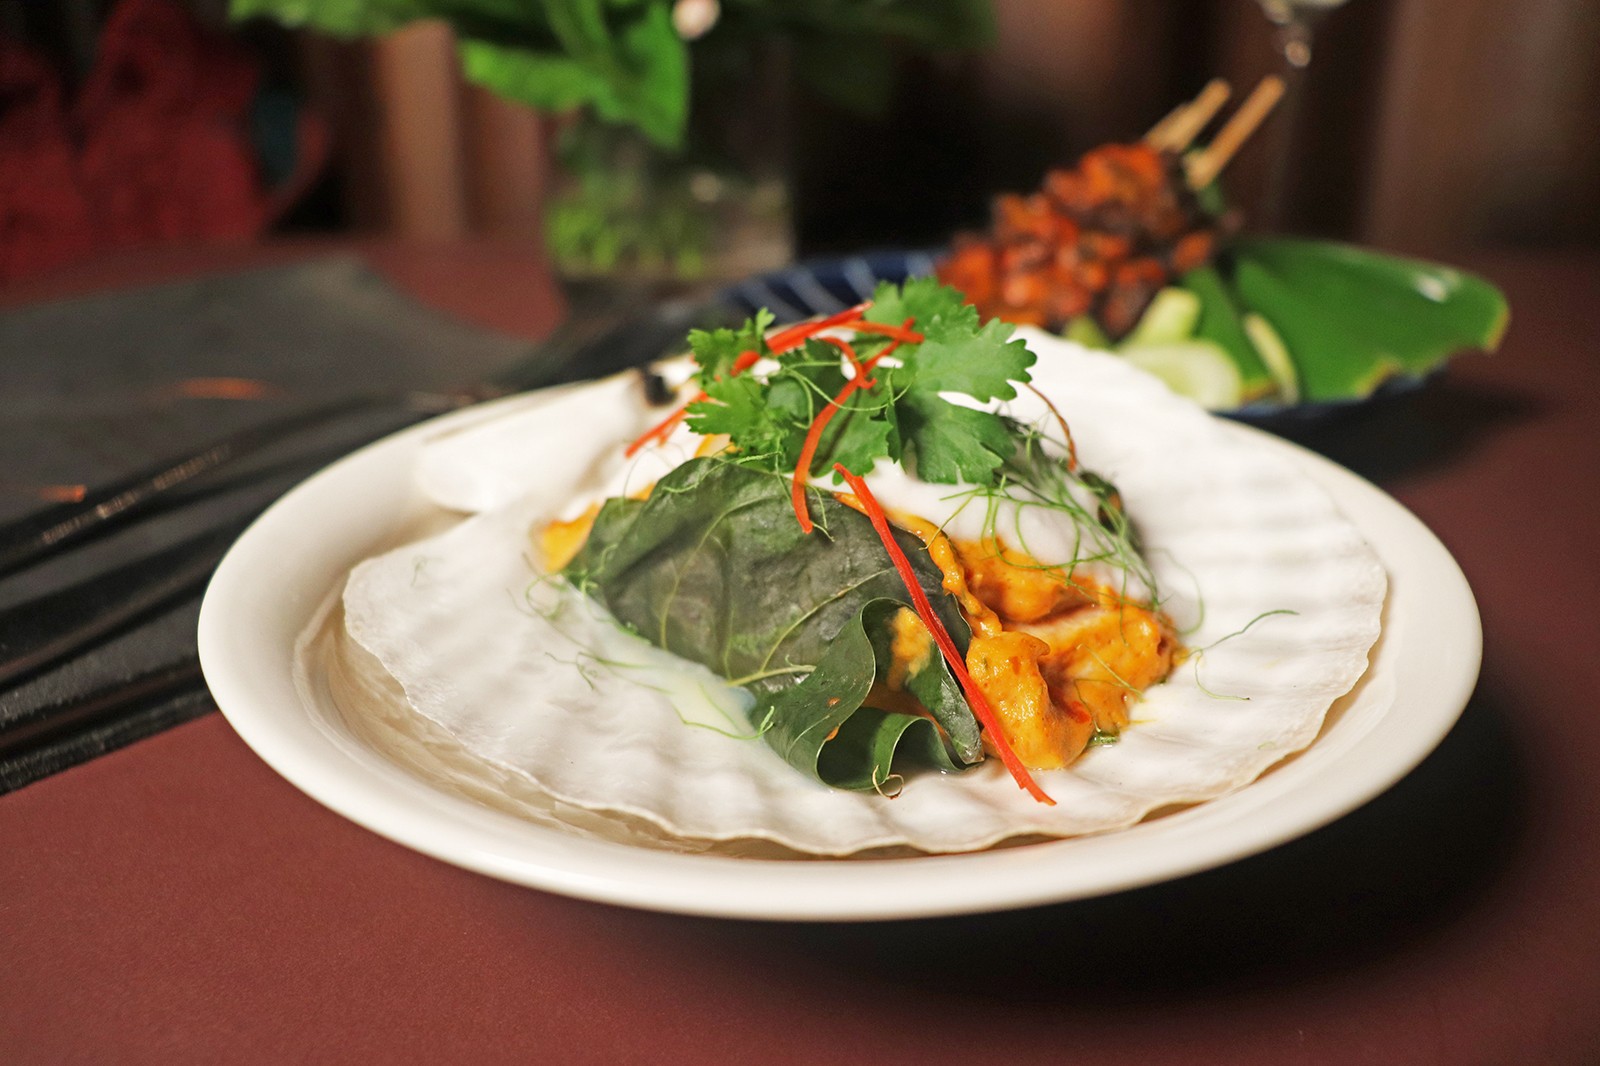 Thai restaurant Aaharn is one of the popular new openings inside Hong Kong cultural complex Tai Kwun.